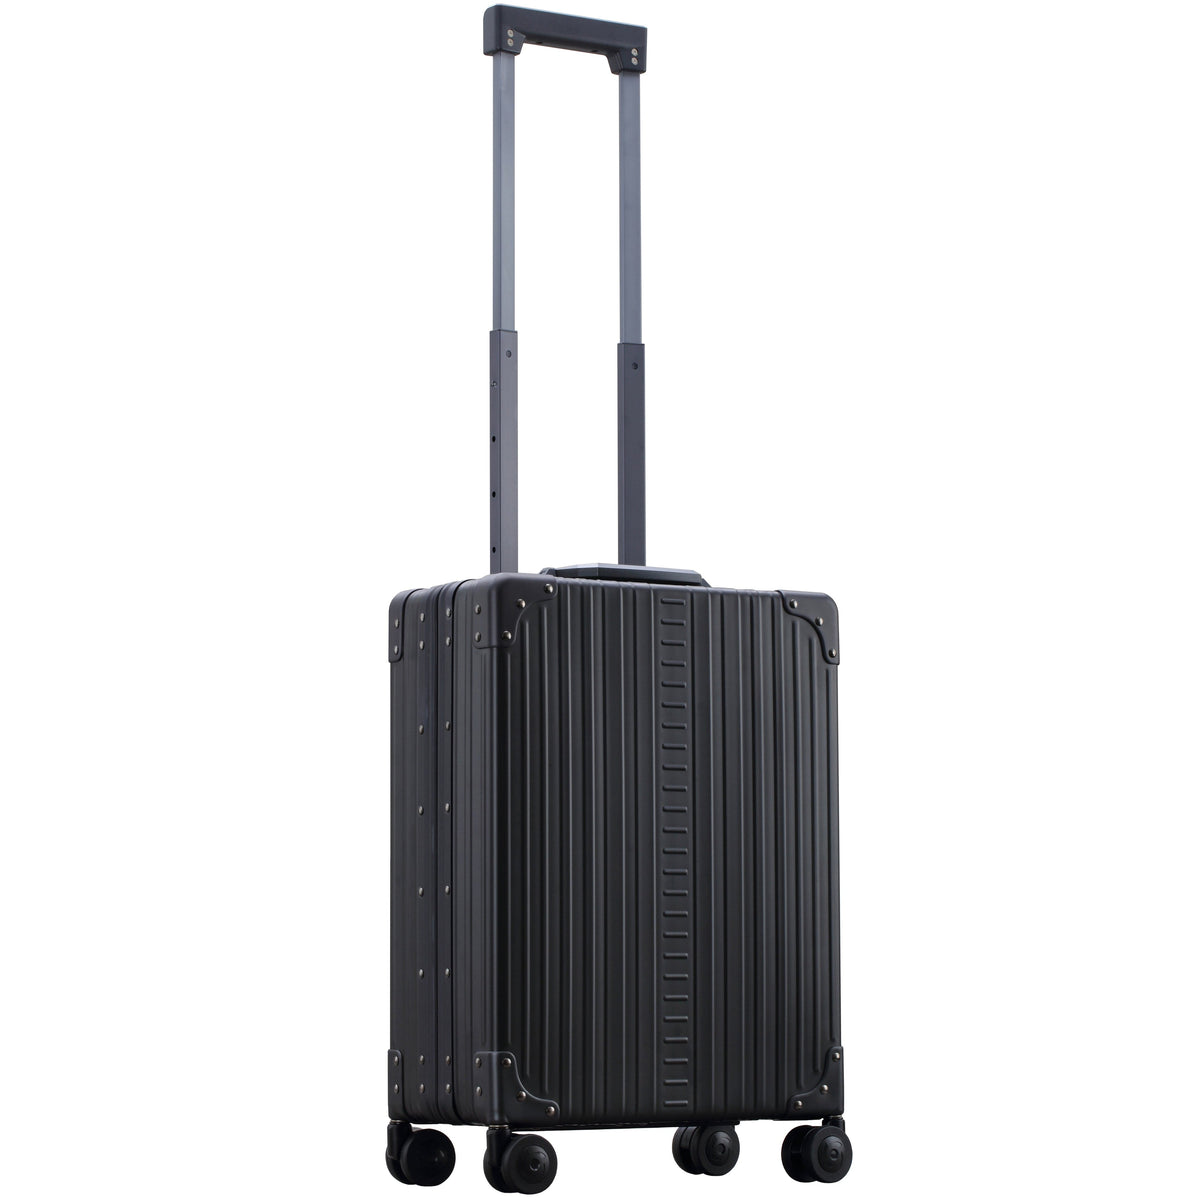 Aleon 21" Vertical Overnight Business Carry-On Luggage